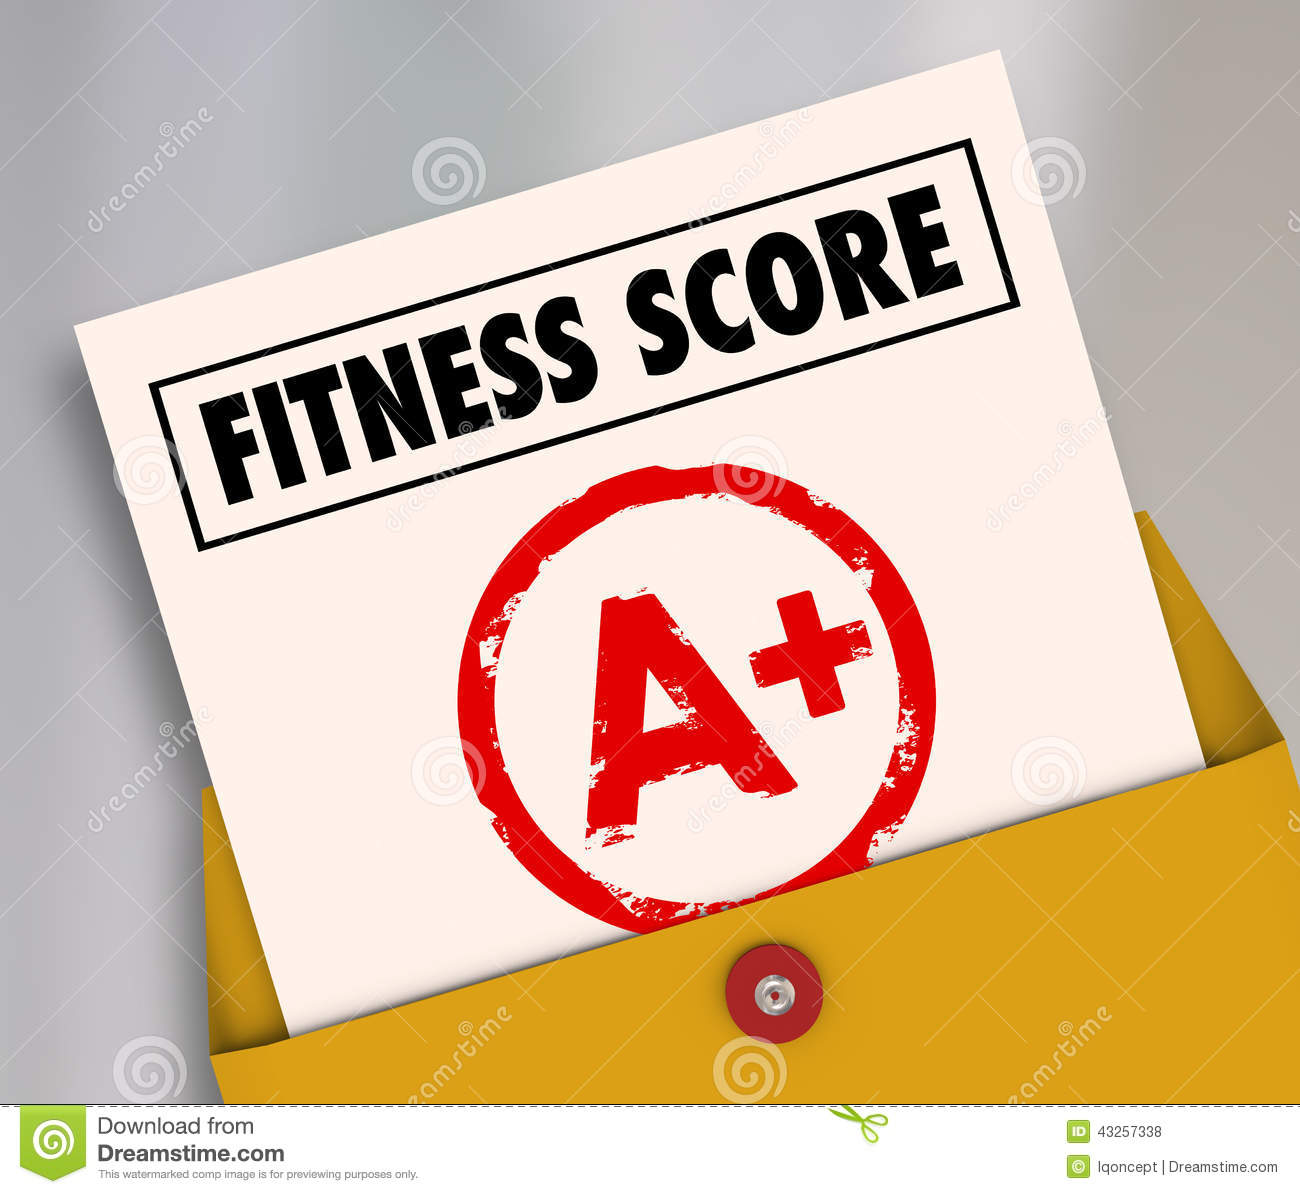 Fitness Score A  On Report Card As Evaluation Results Of Your Physical    